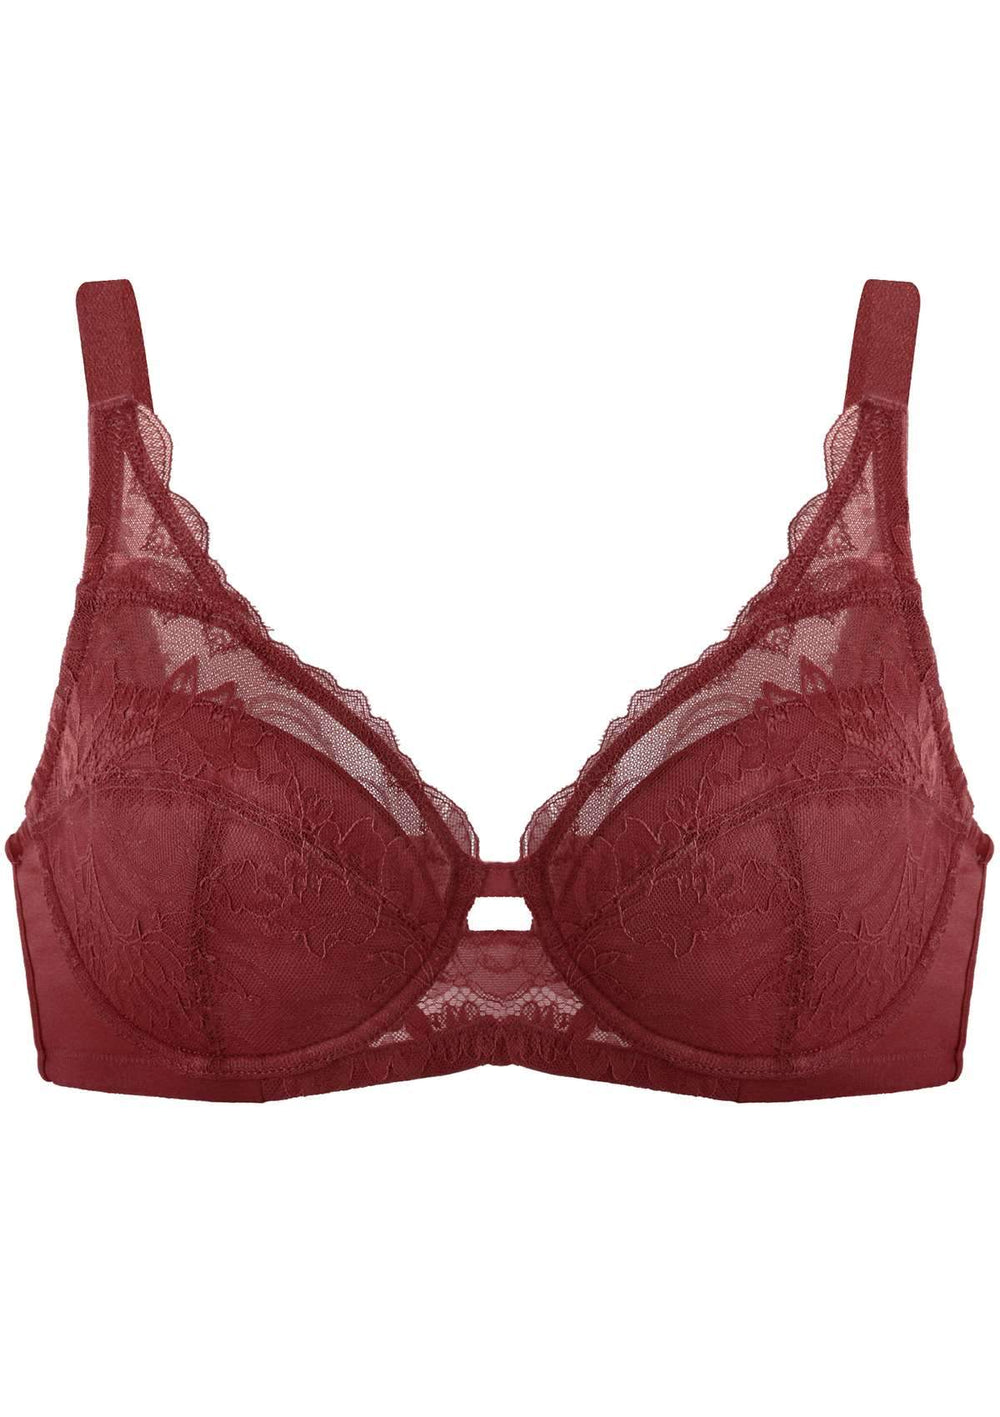 HSIA Bra for Women Push Up,Fashion Deep Cup Bras Lightly - Import It All